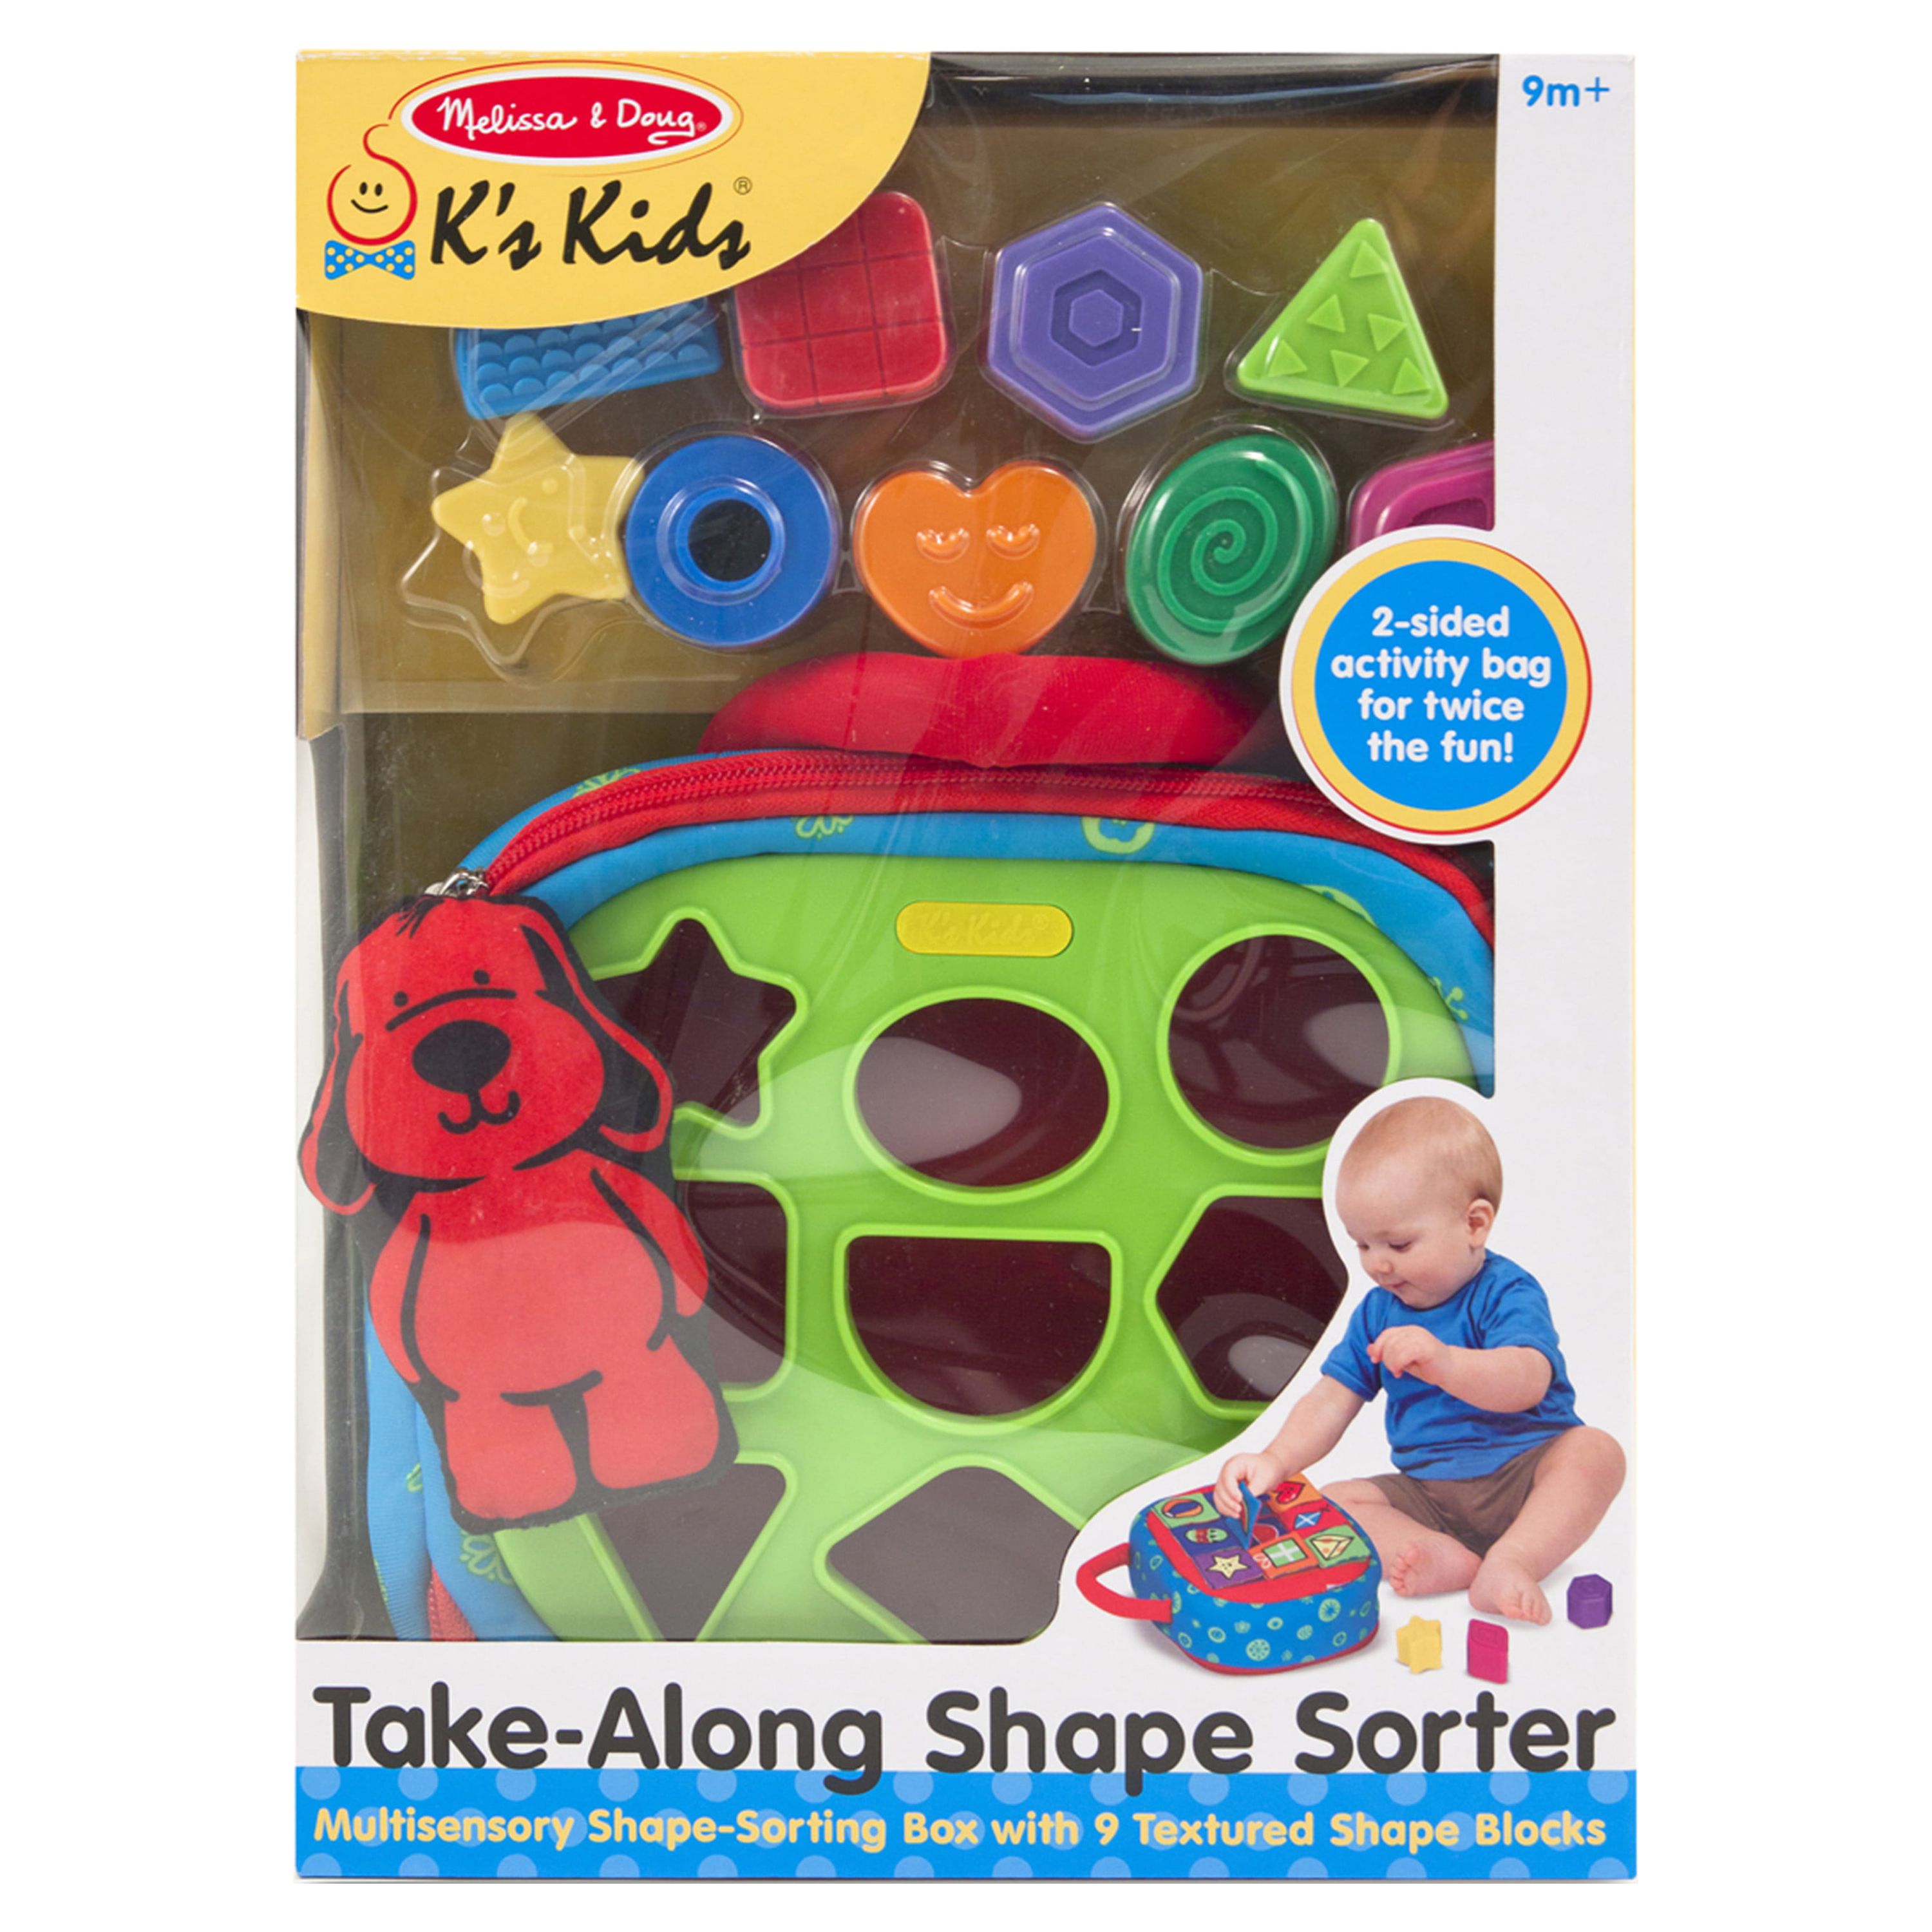 Melissa & Doug K's Kids Take-Along Shape Sorter Baby Toy With 2-Sided Activity Bag and 9 Textured Shape Blocks - image 4 of 11